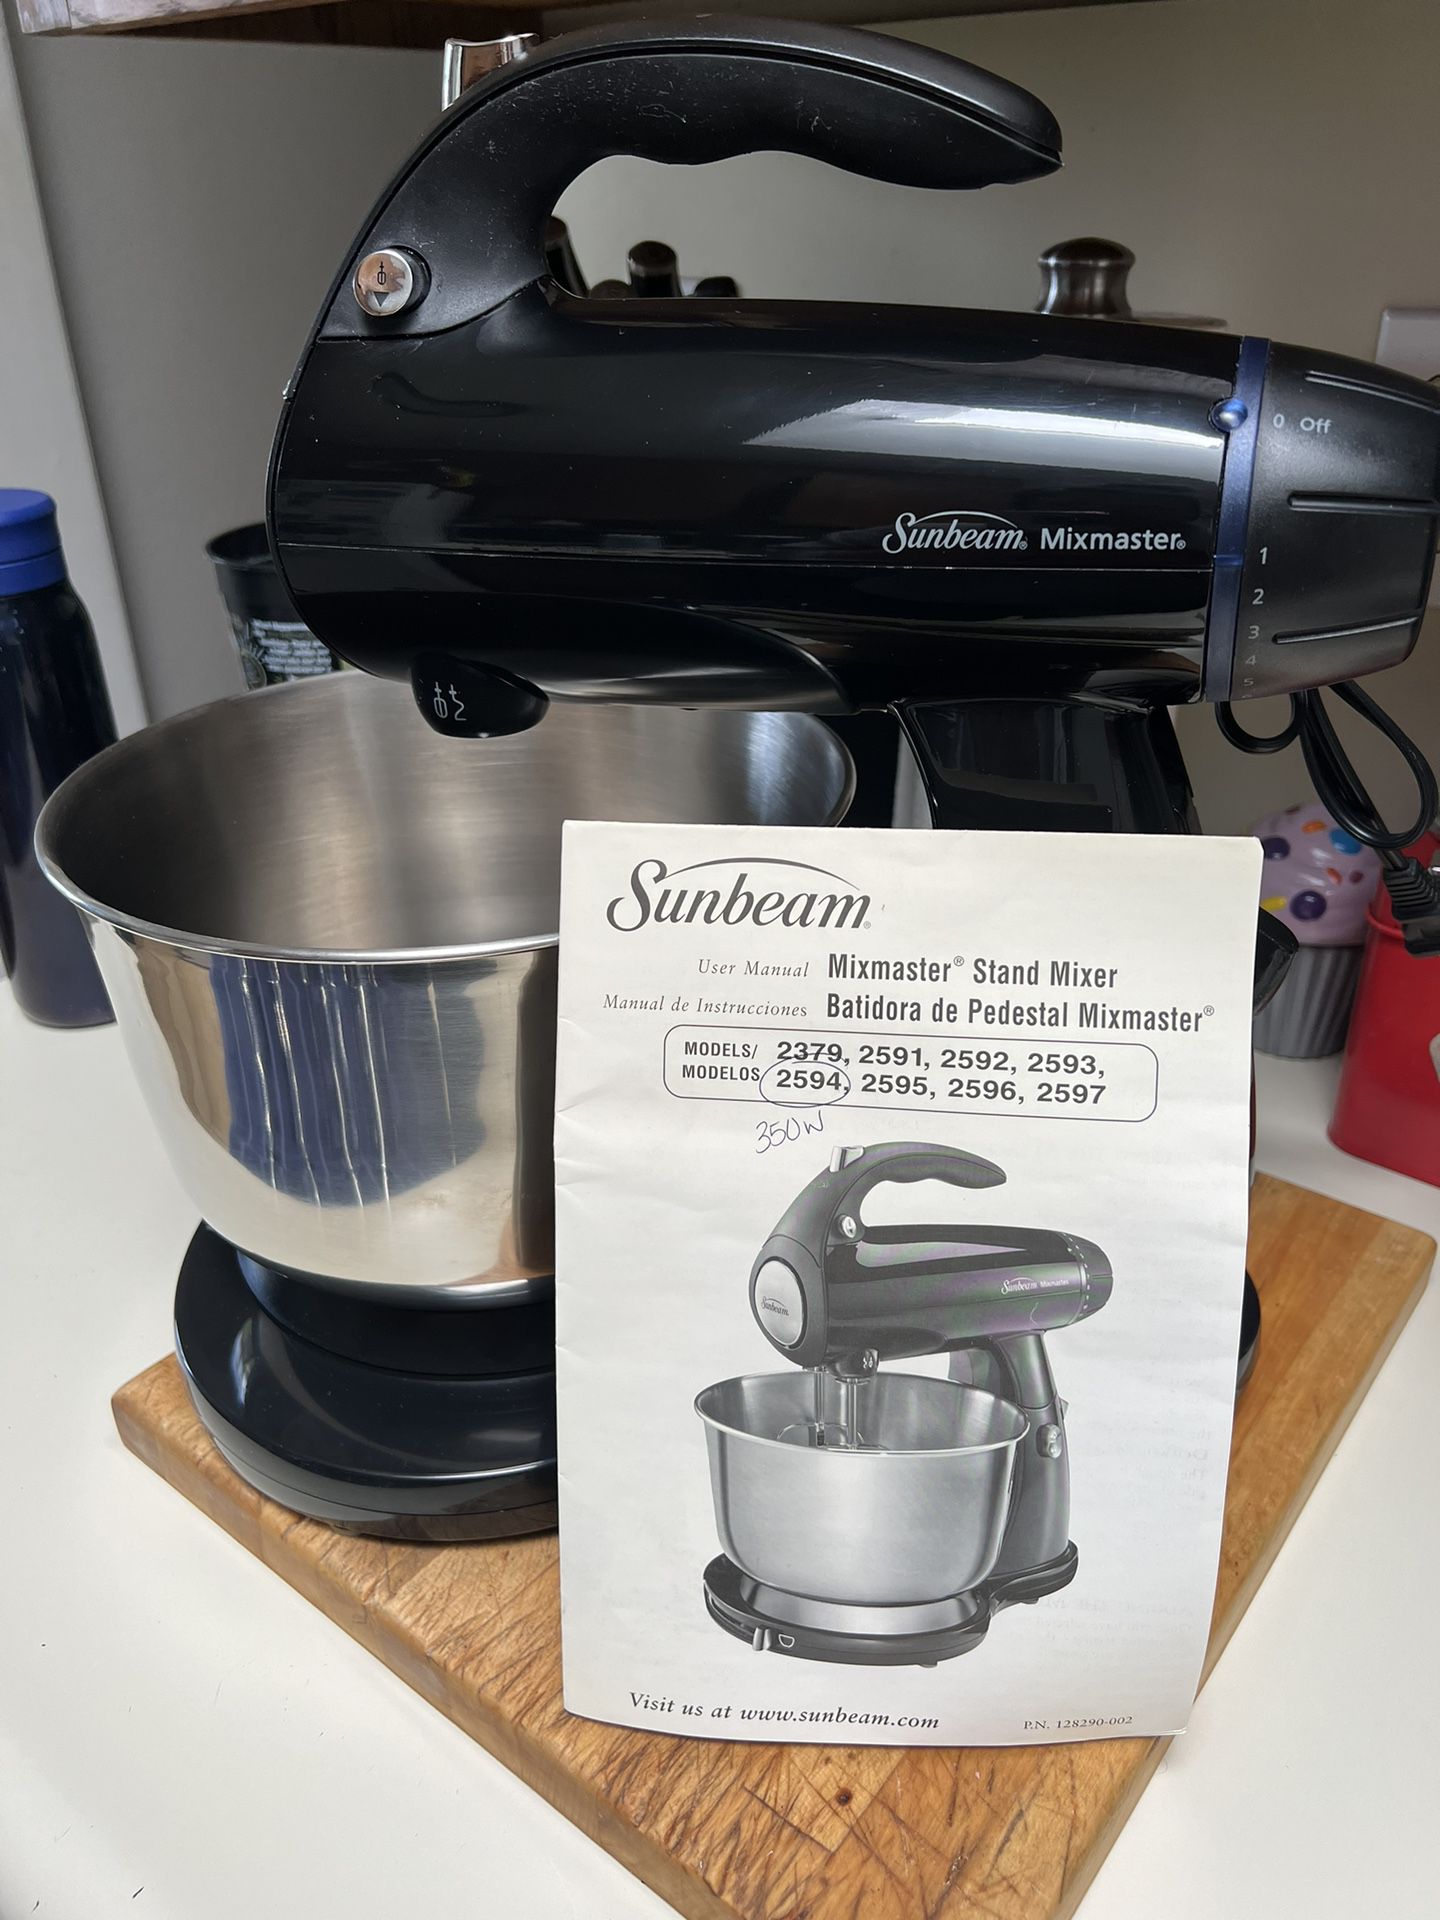 Sunbeam MixMaster Stand Mixer for Sale in Whittier, CA - OfferUp